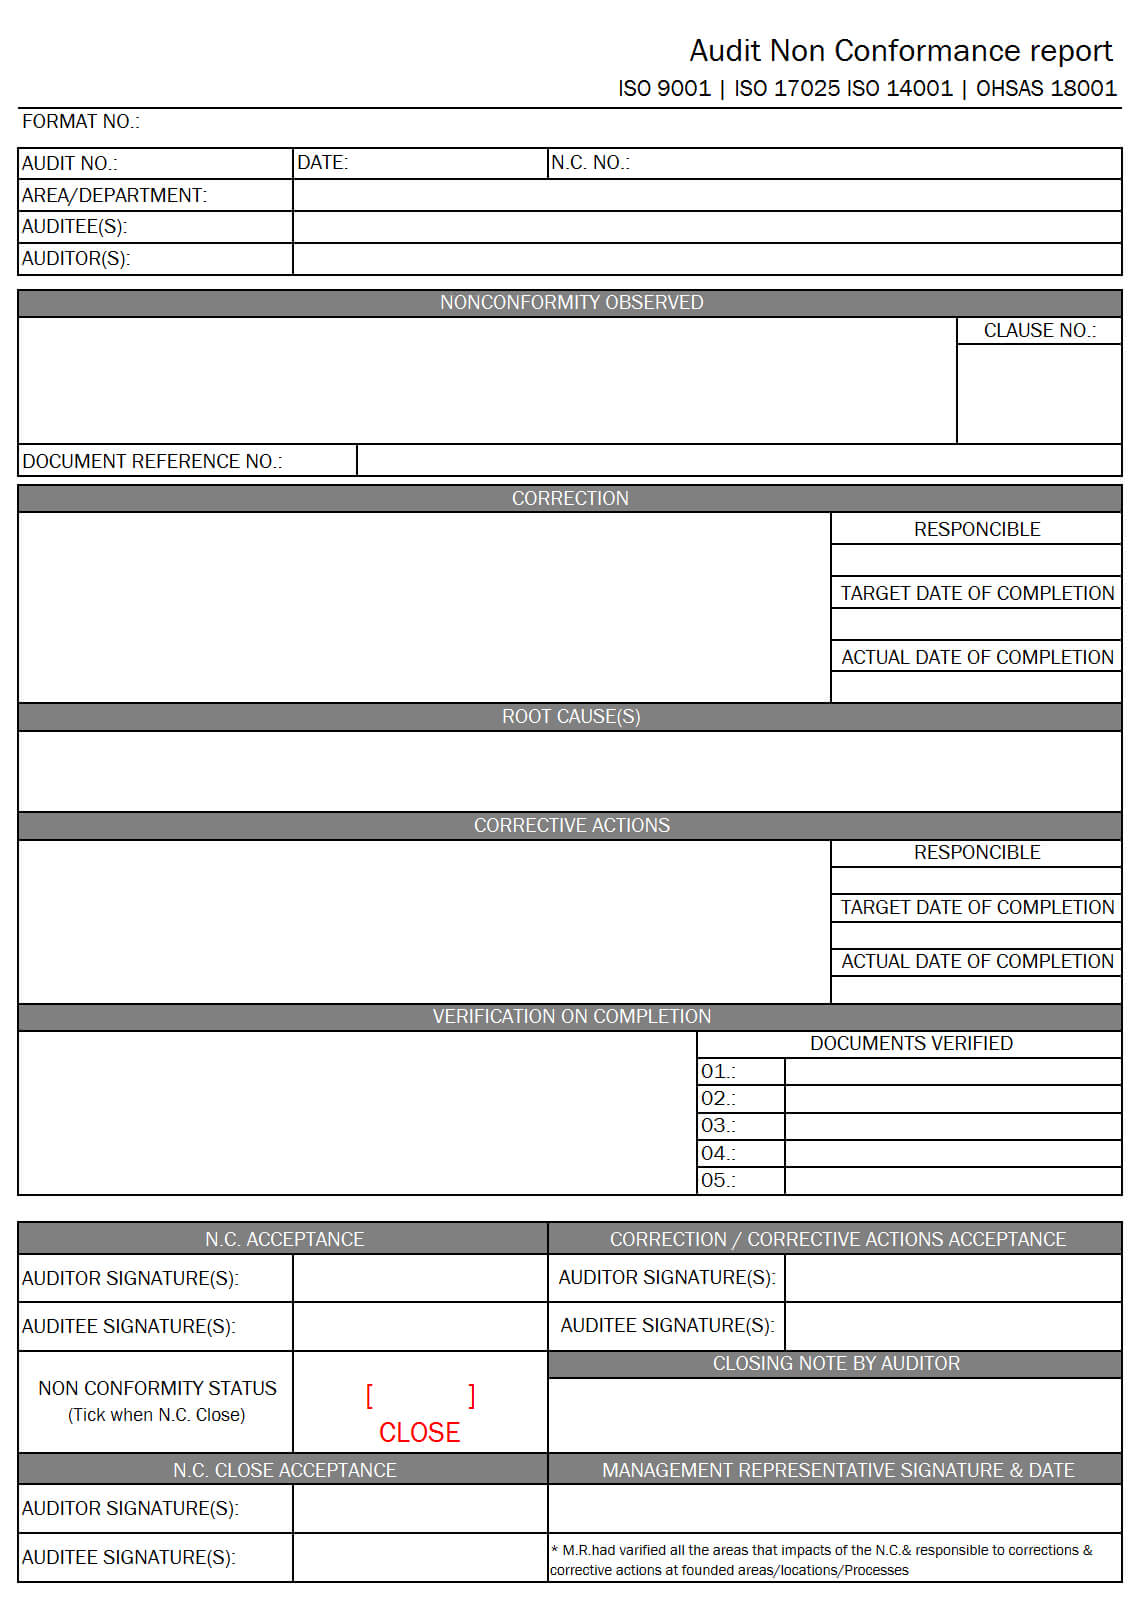 Audit Non Conformance Report – Inside Internal Audit Report Template Iso 9001